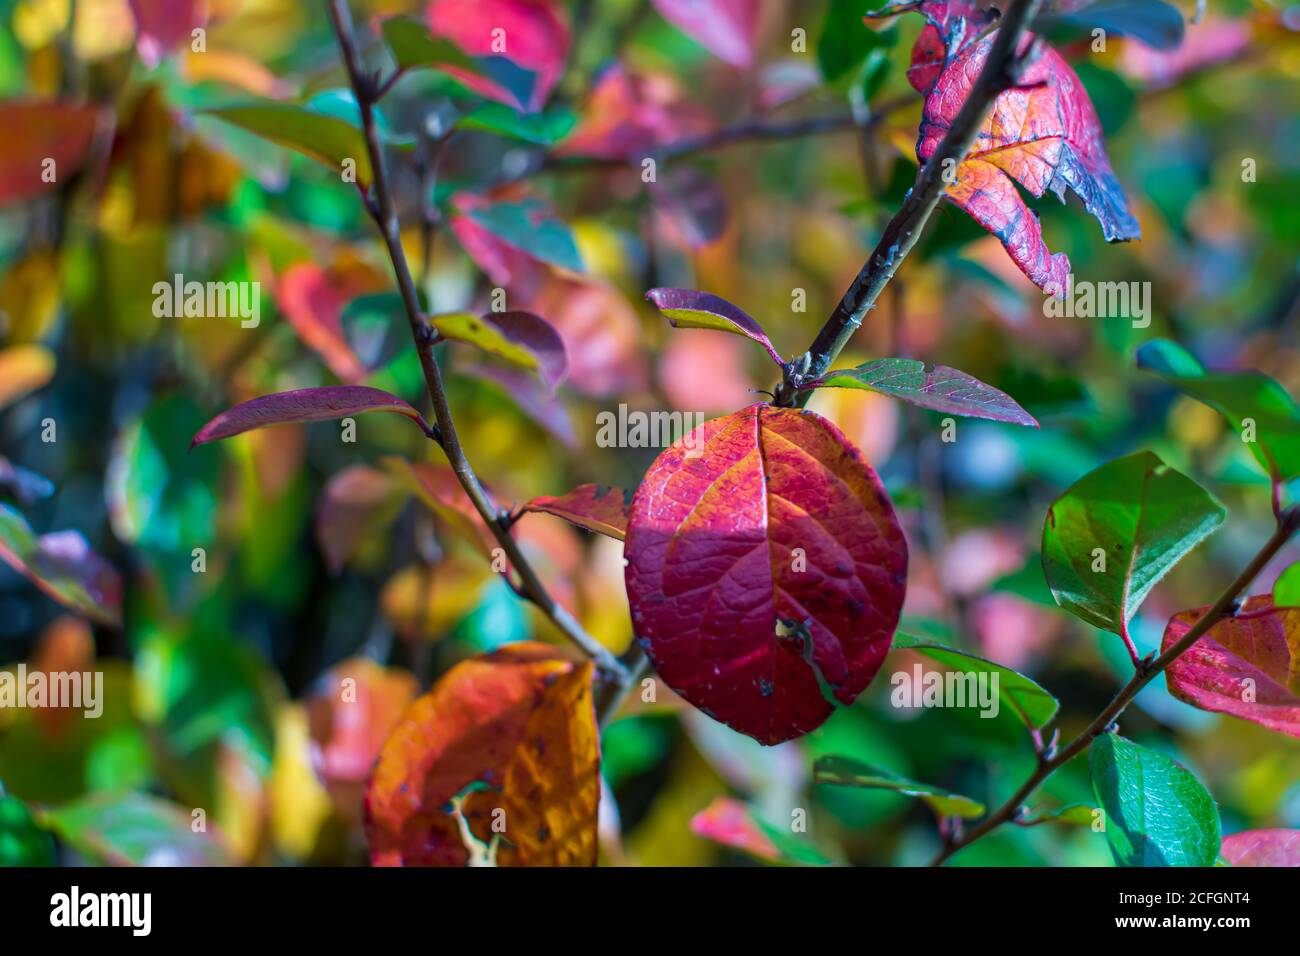 Orange red yellow green shiny cotoneaster (Cotoneaster lucidus) leaves background Stock Photo